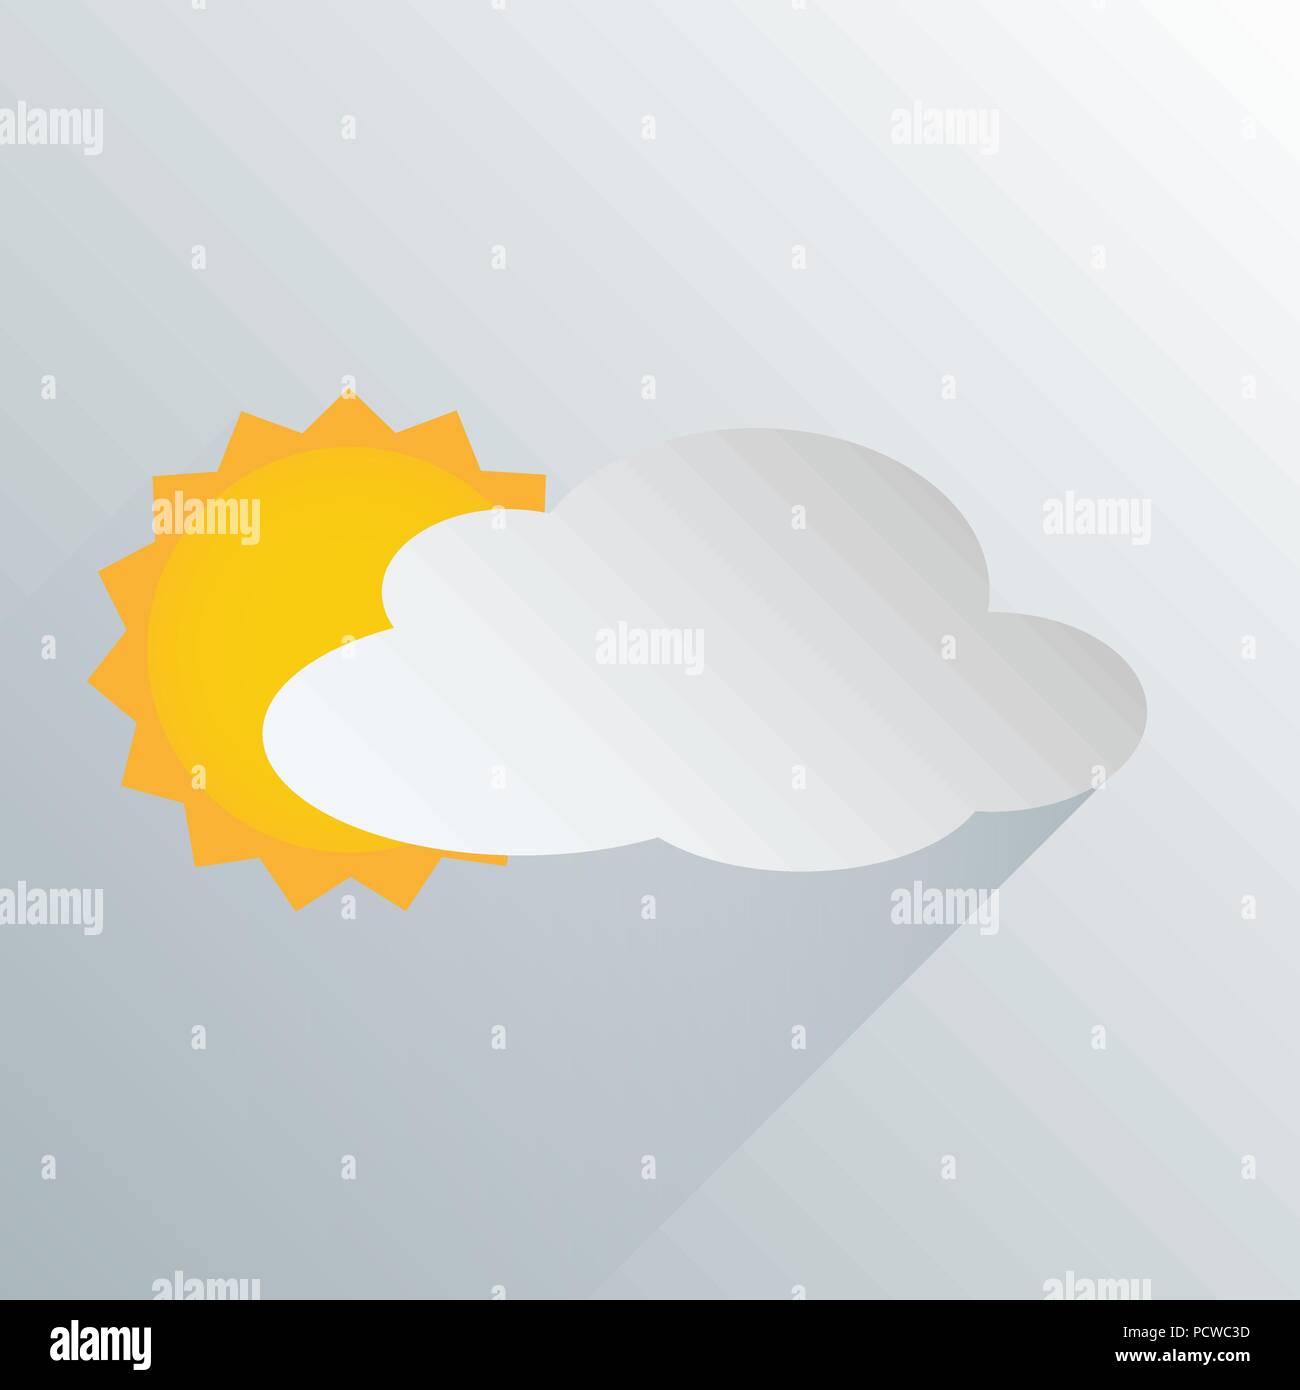 Sunny Partly Cloudy Stock Illustrations – 1,394 Sunny Partly